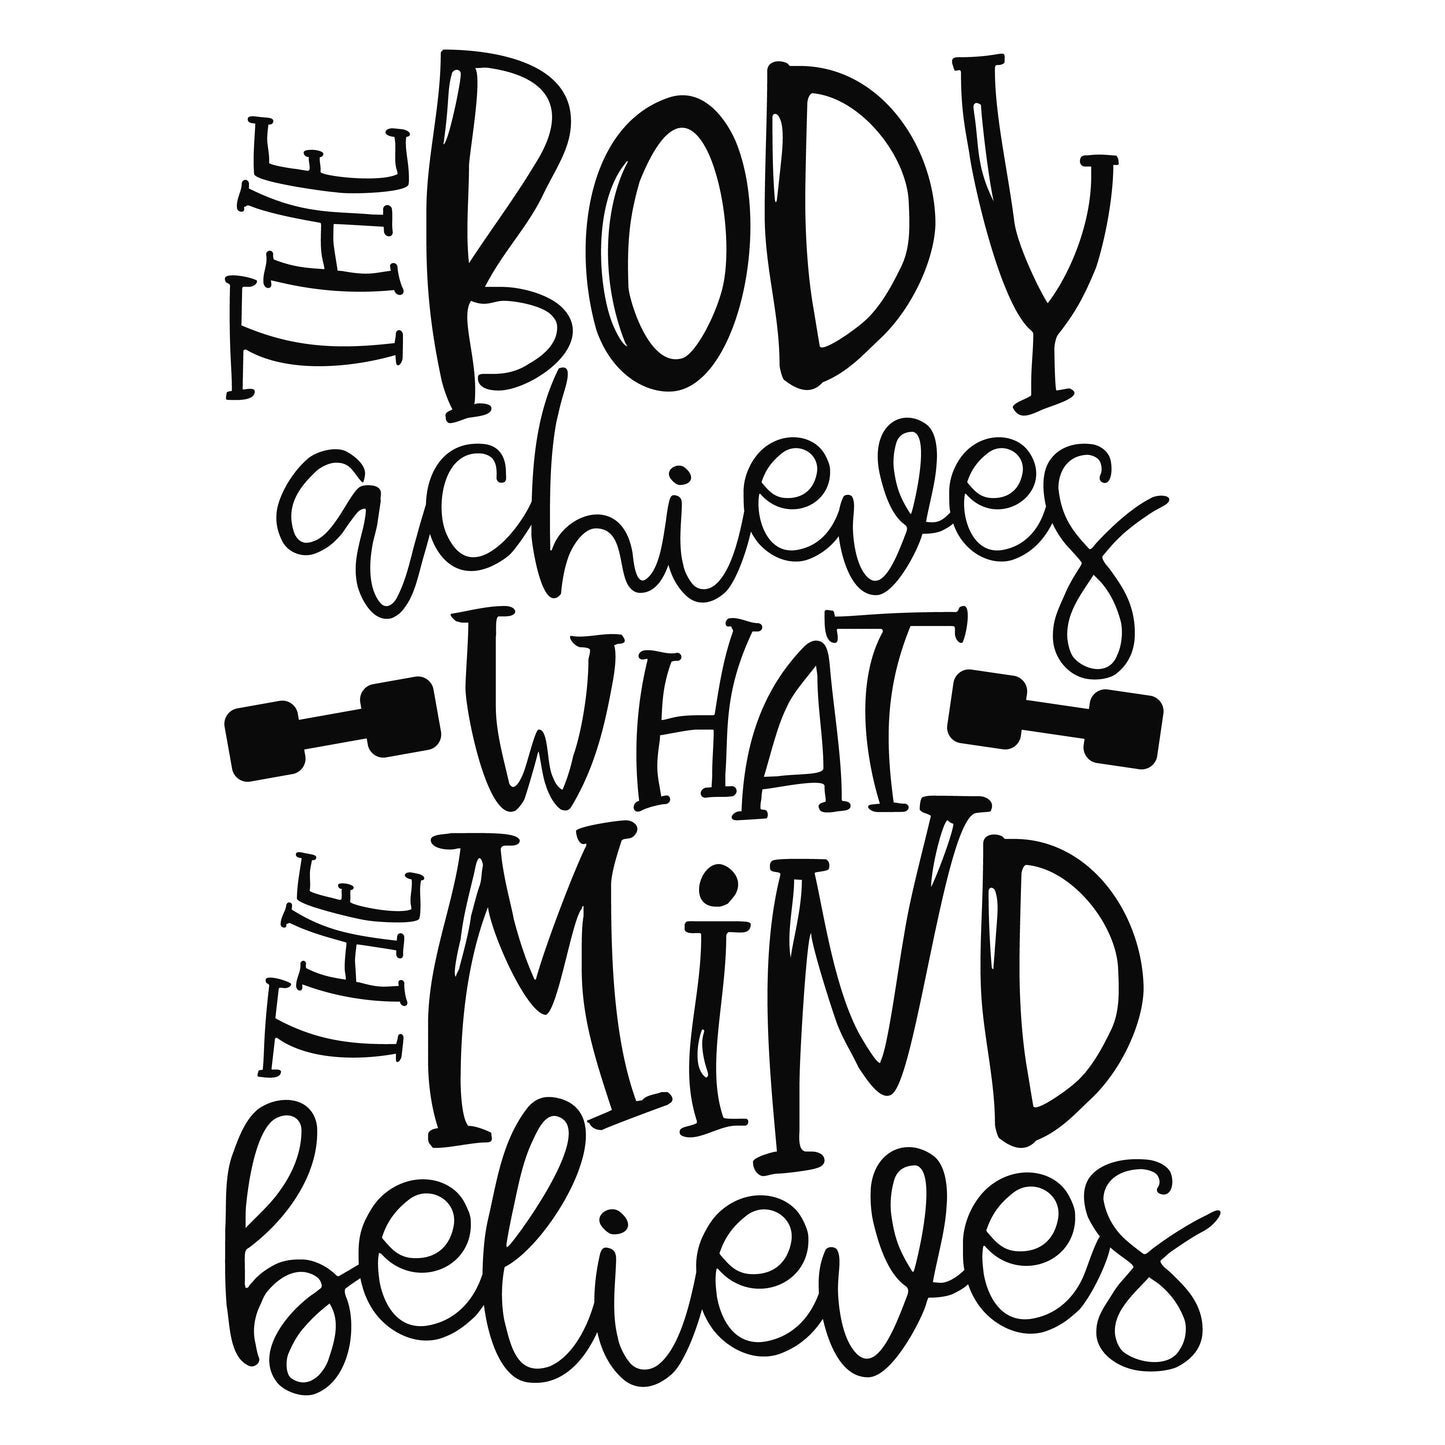 THE BODY ACHIEVES WHAT THE MIND BELIEVES